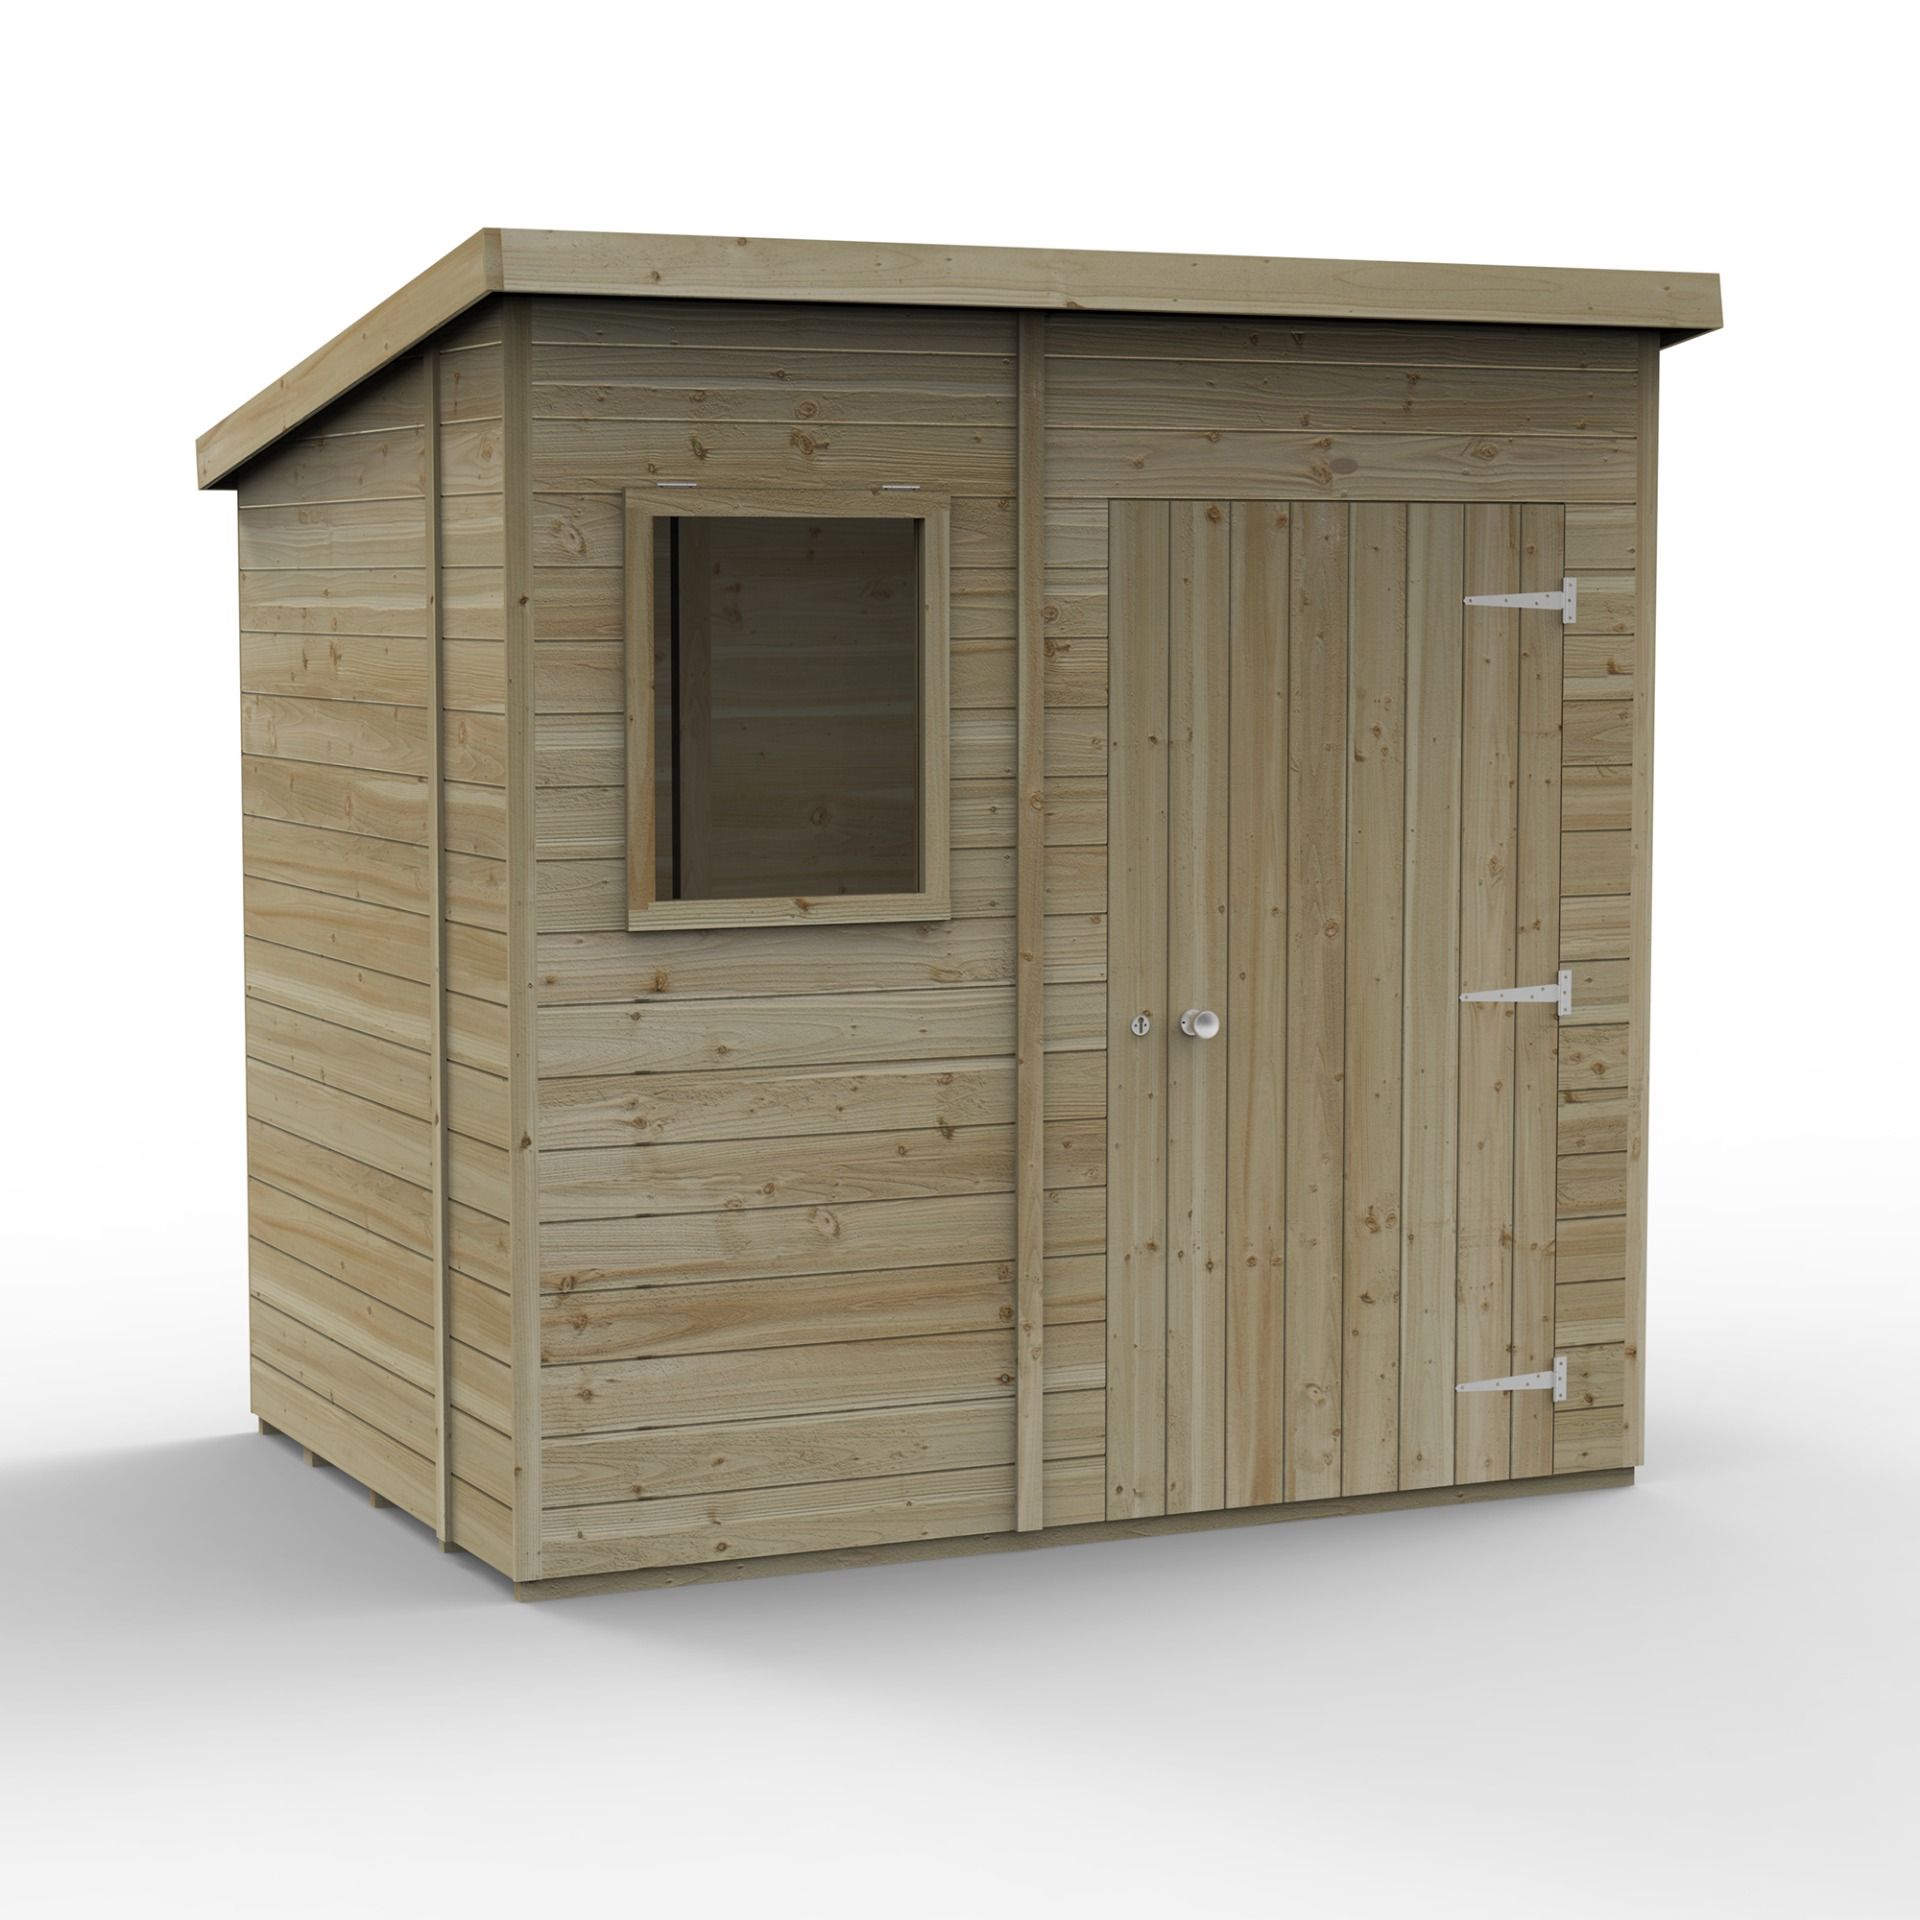 Forest Garden Tongue & Groove Pent Shed - 7' x 5'